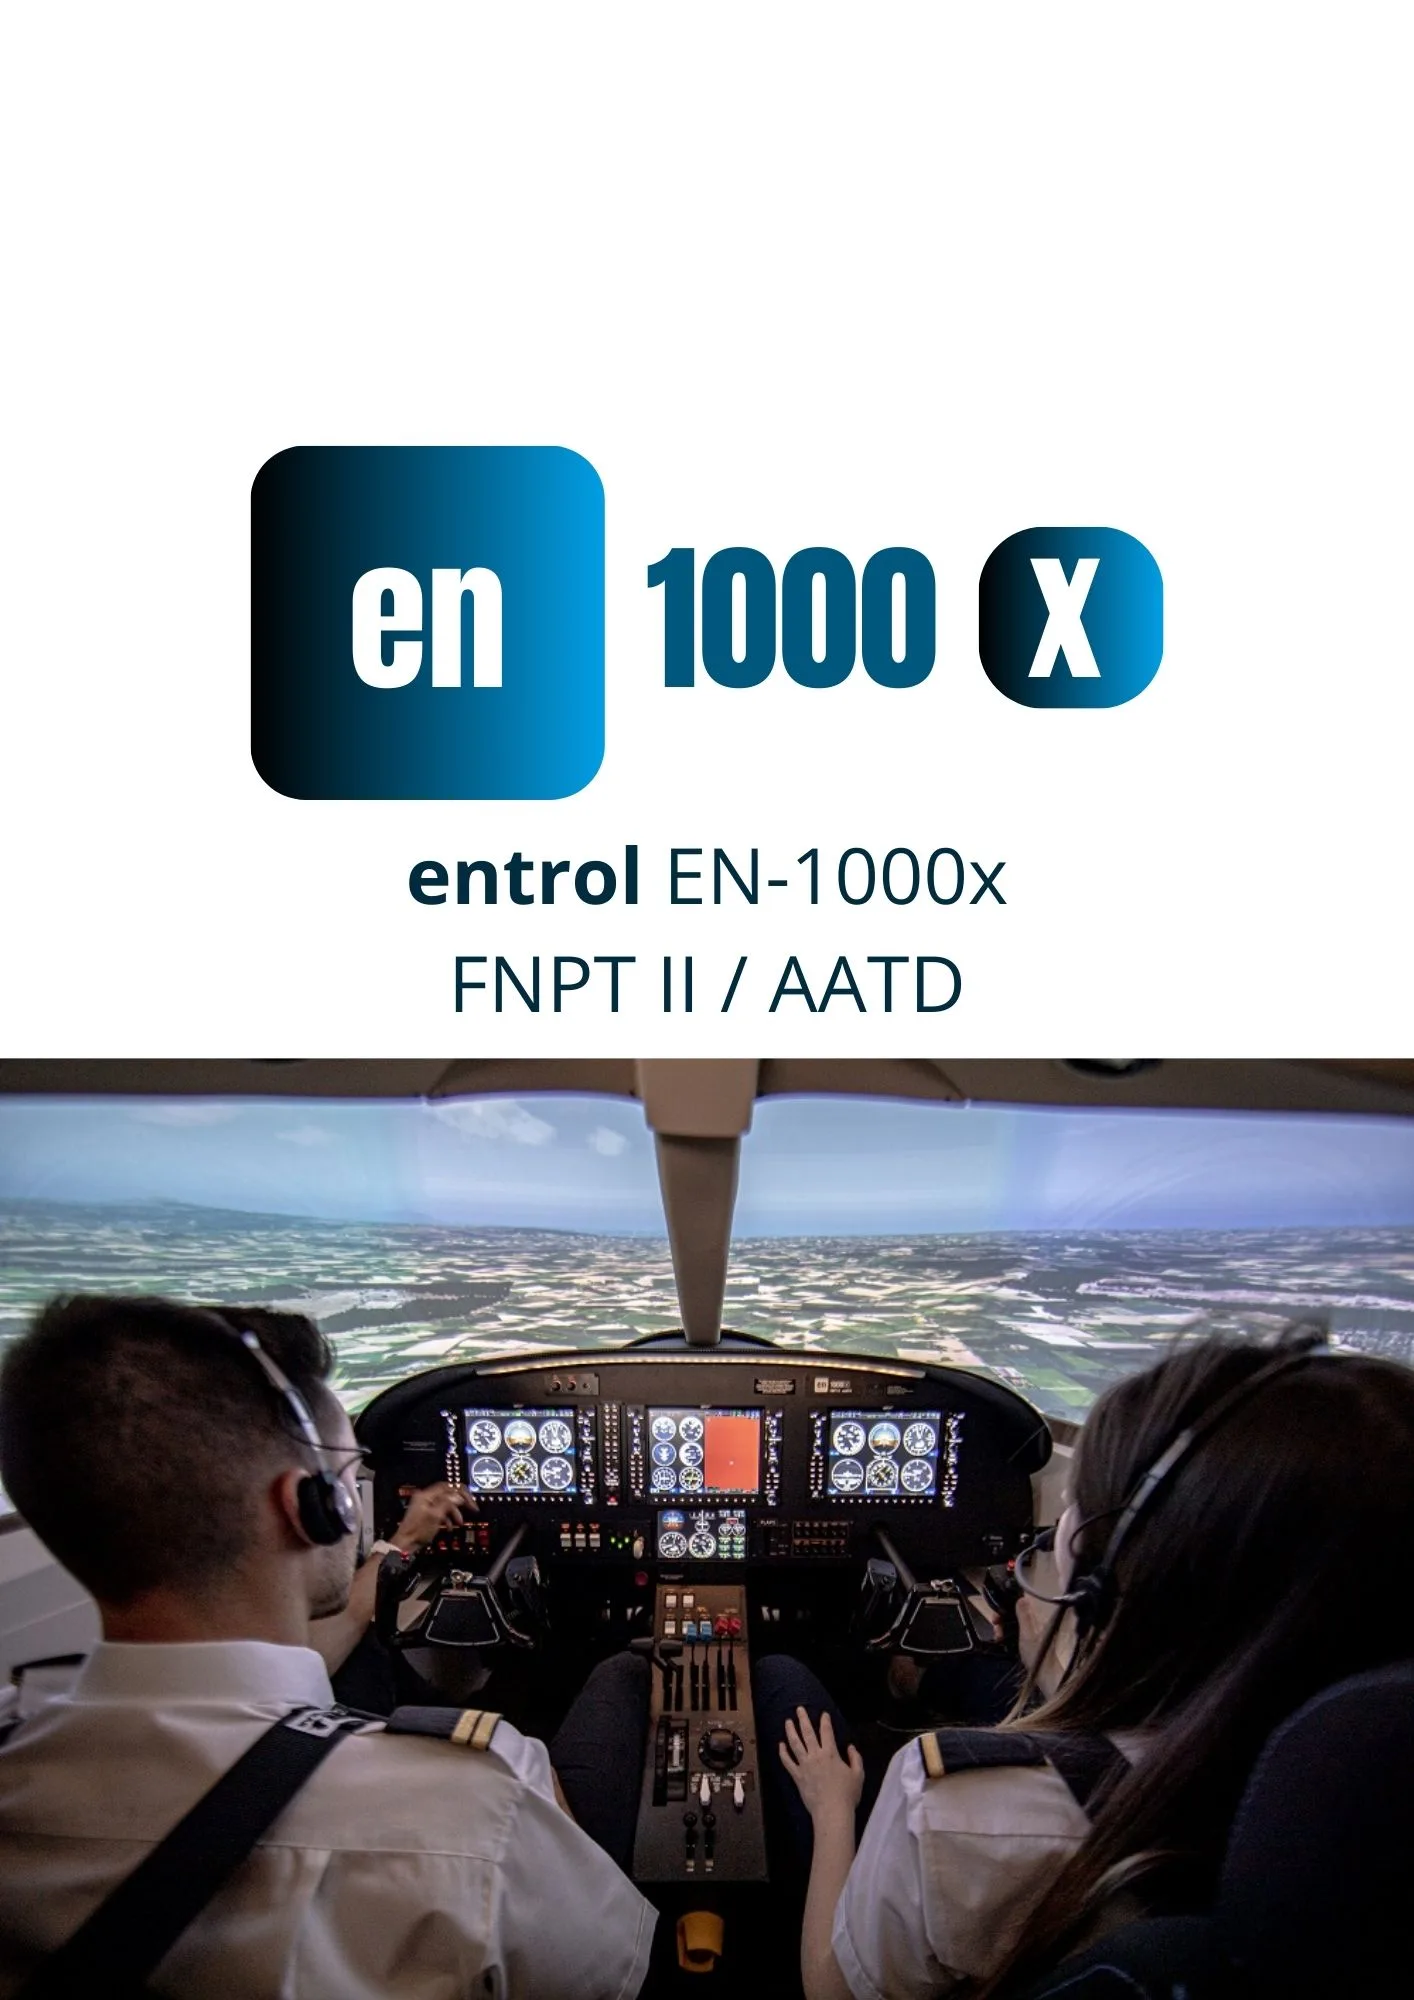 Club aéreo Capecar purchases the first en-1000x AATD in South America